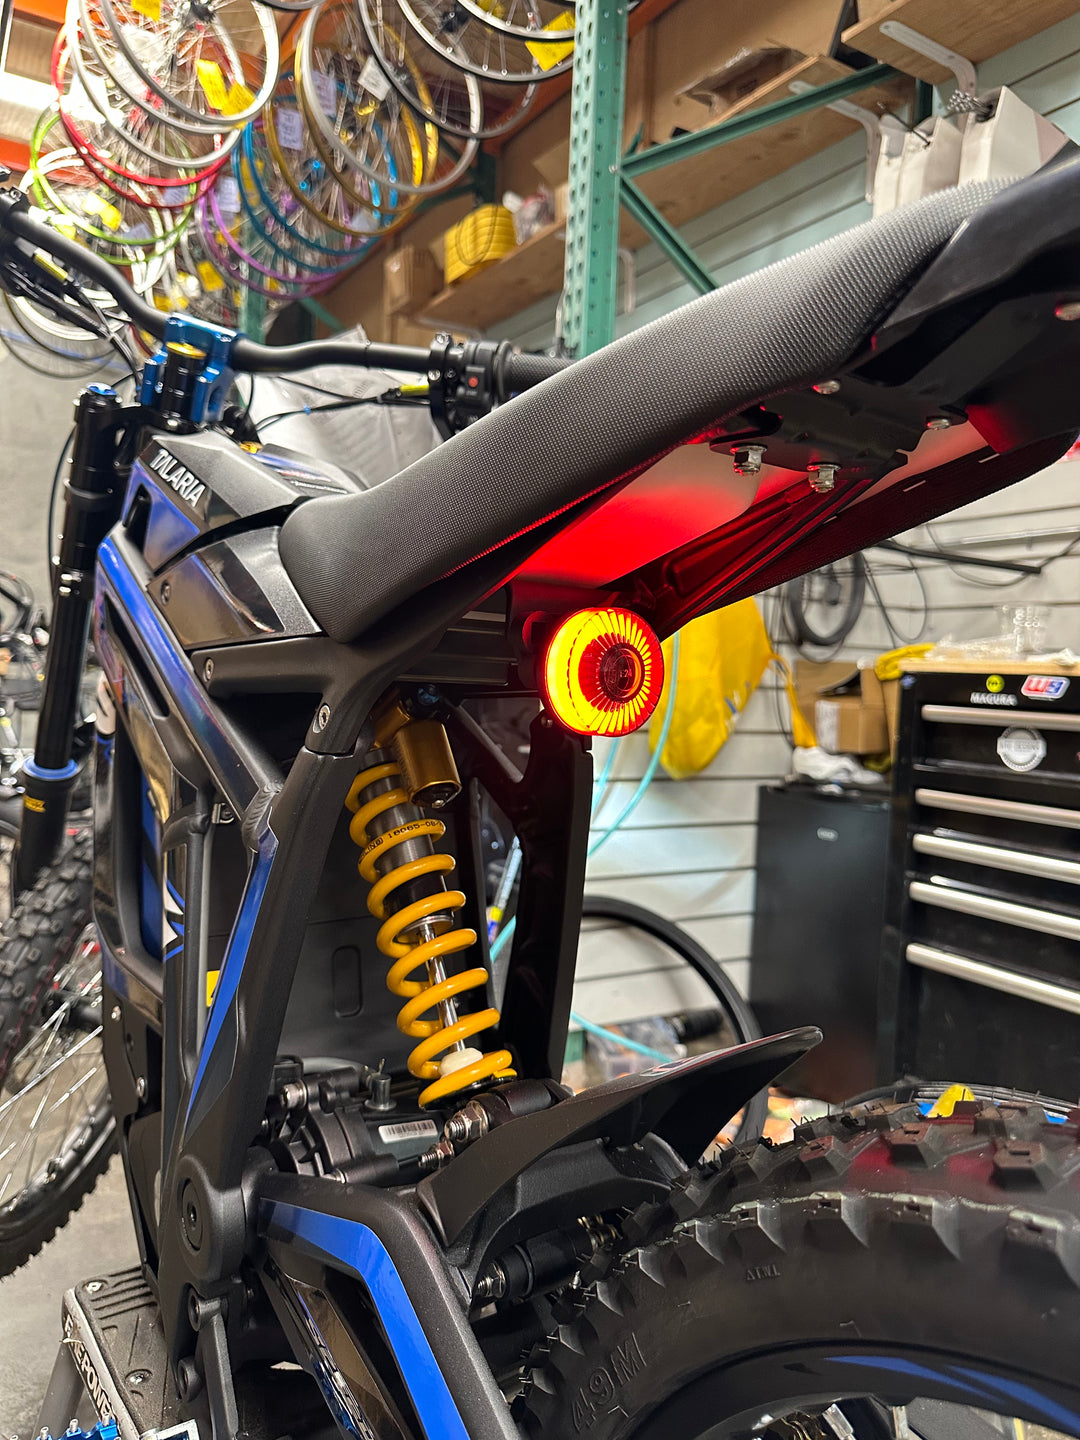 Project 9 designs functional brake light for the talaria mx4! Gets brighter as the brakes are pulled. Perfect safety upgrade for your Talaria! 